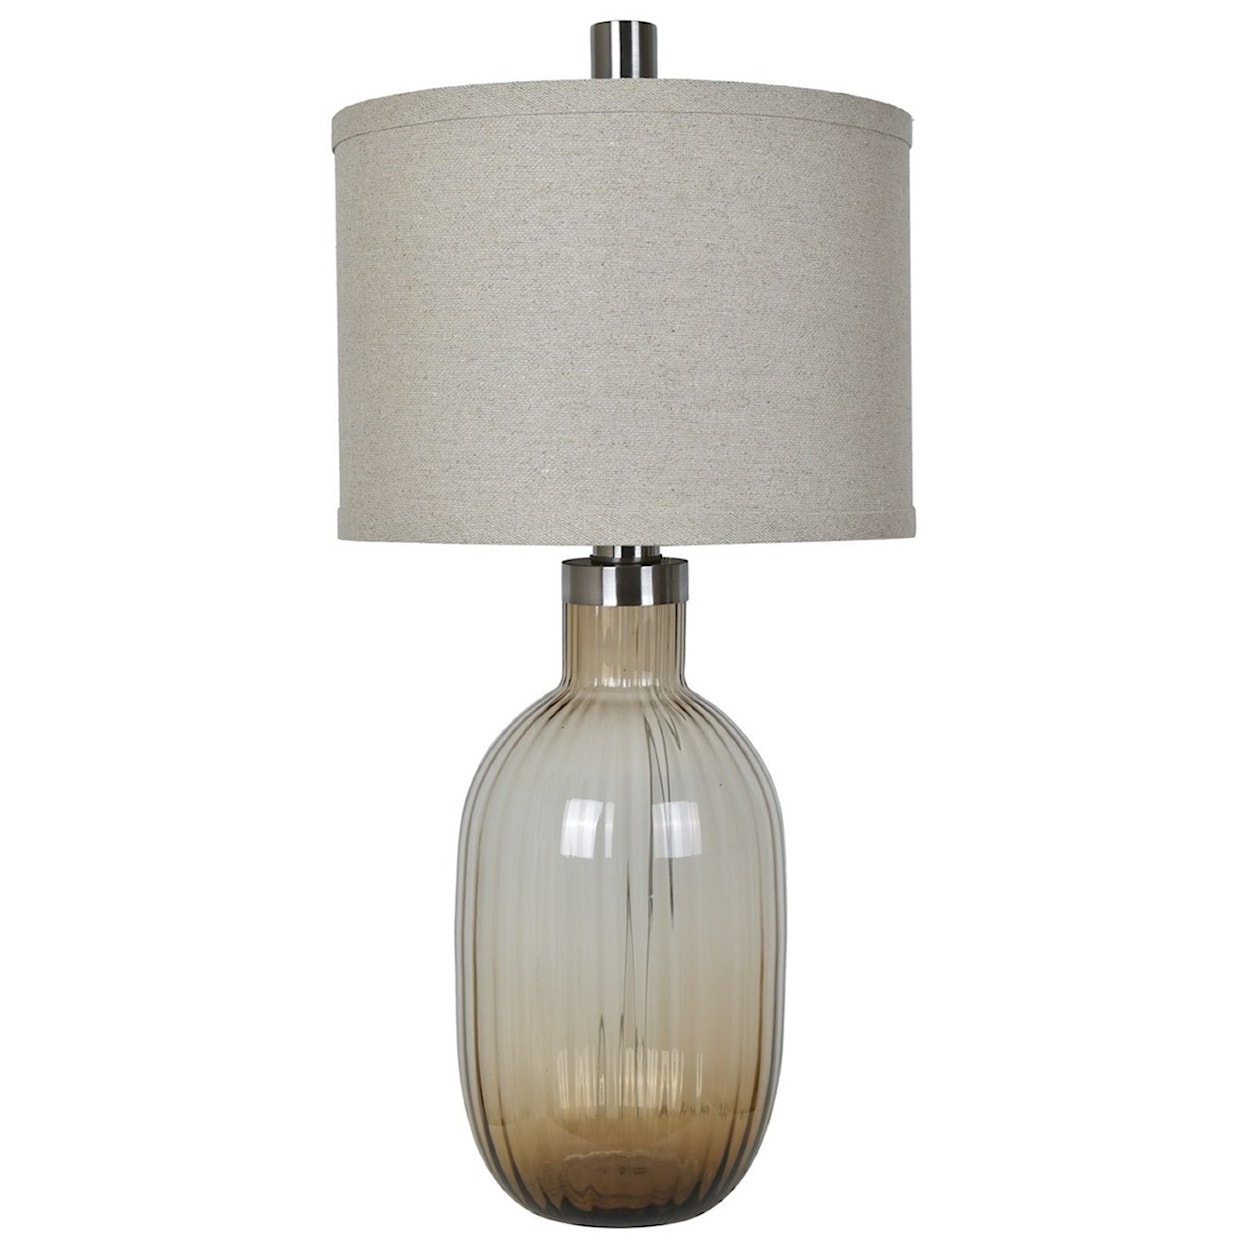 Crestview Collection Lighting Oliver Table Lamp